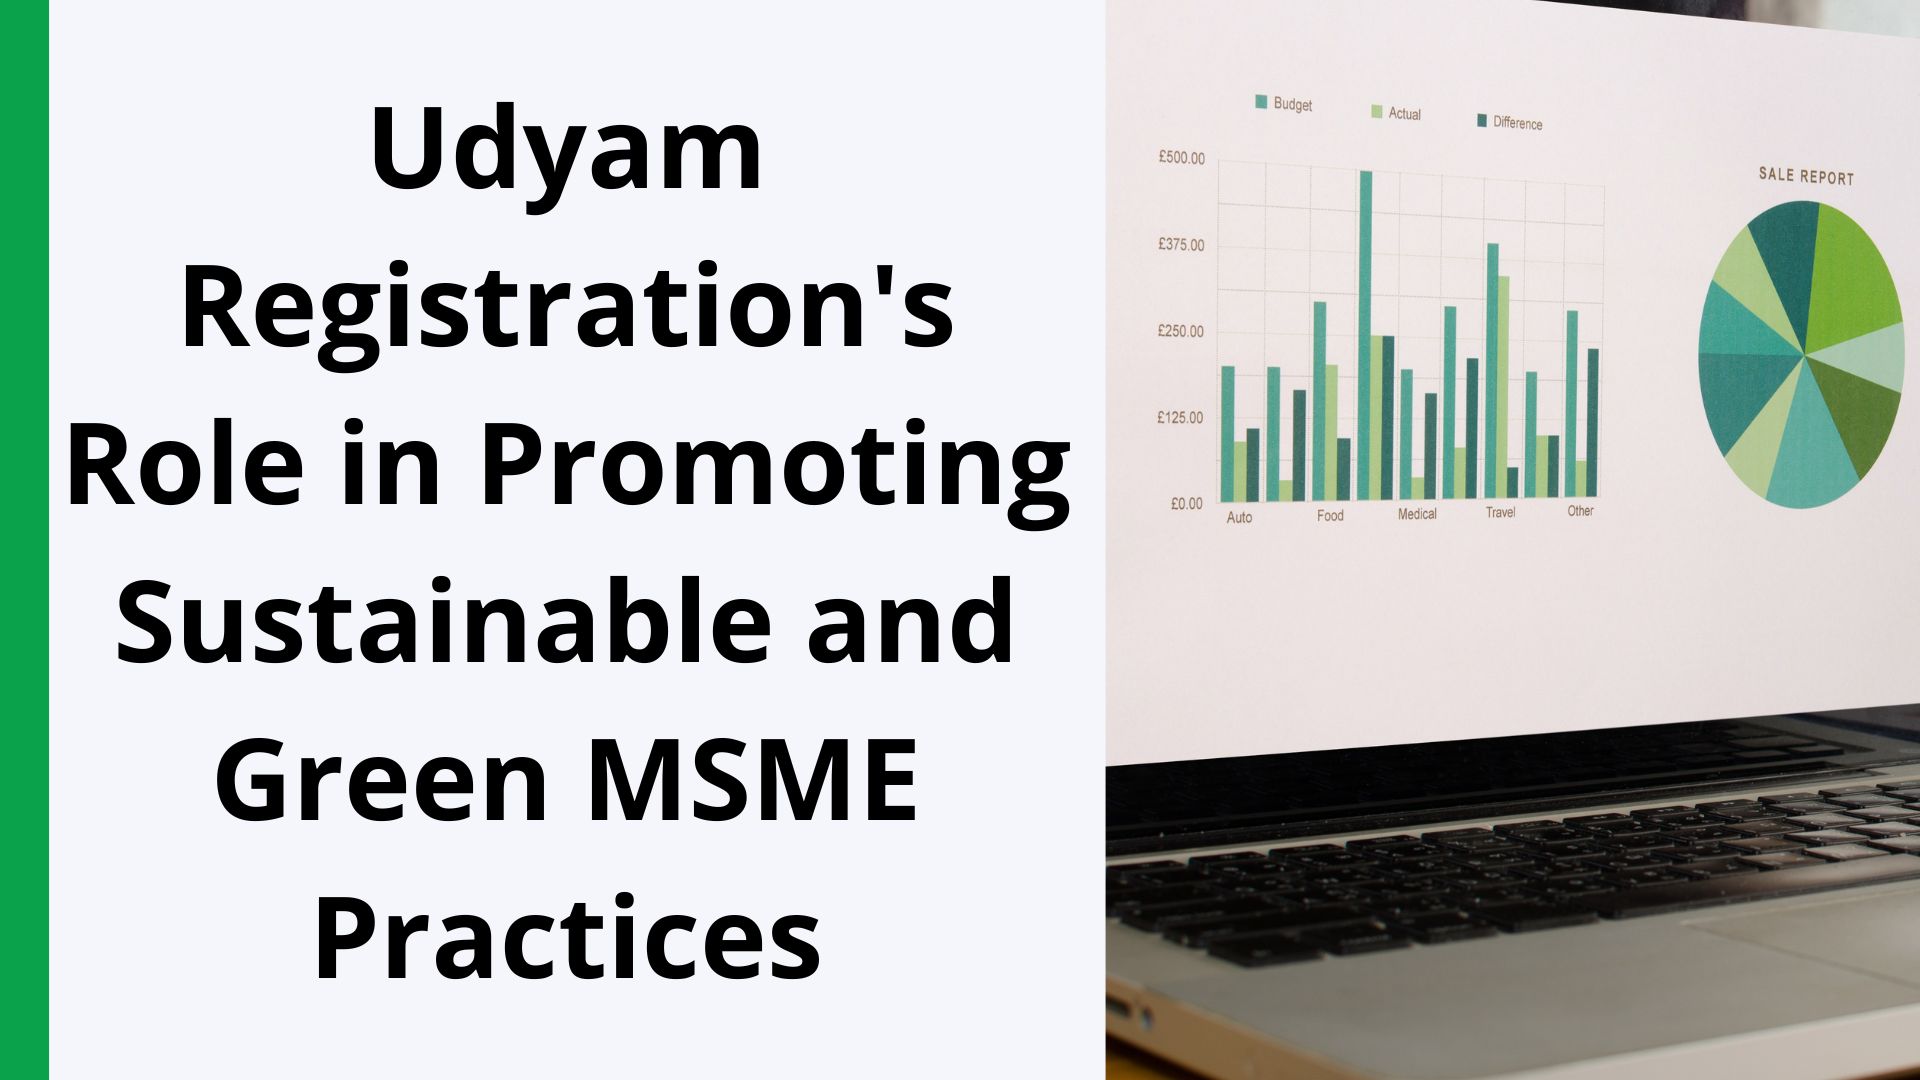 Udyam Registration's Role in Promoting Sustainable and Green MSME Practices